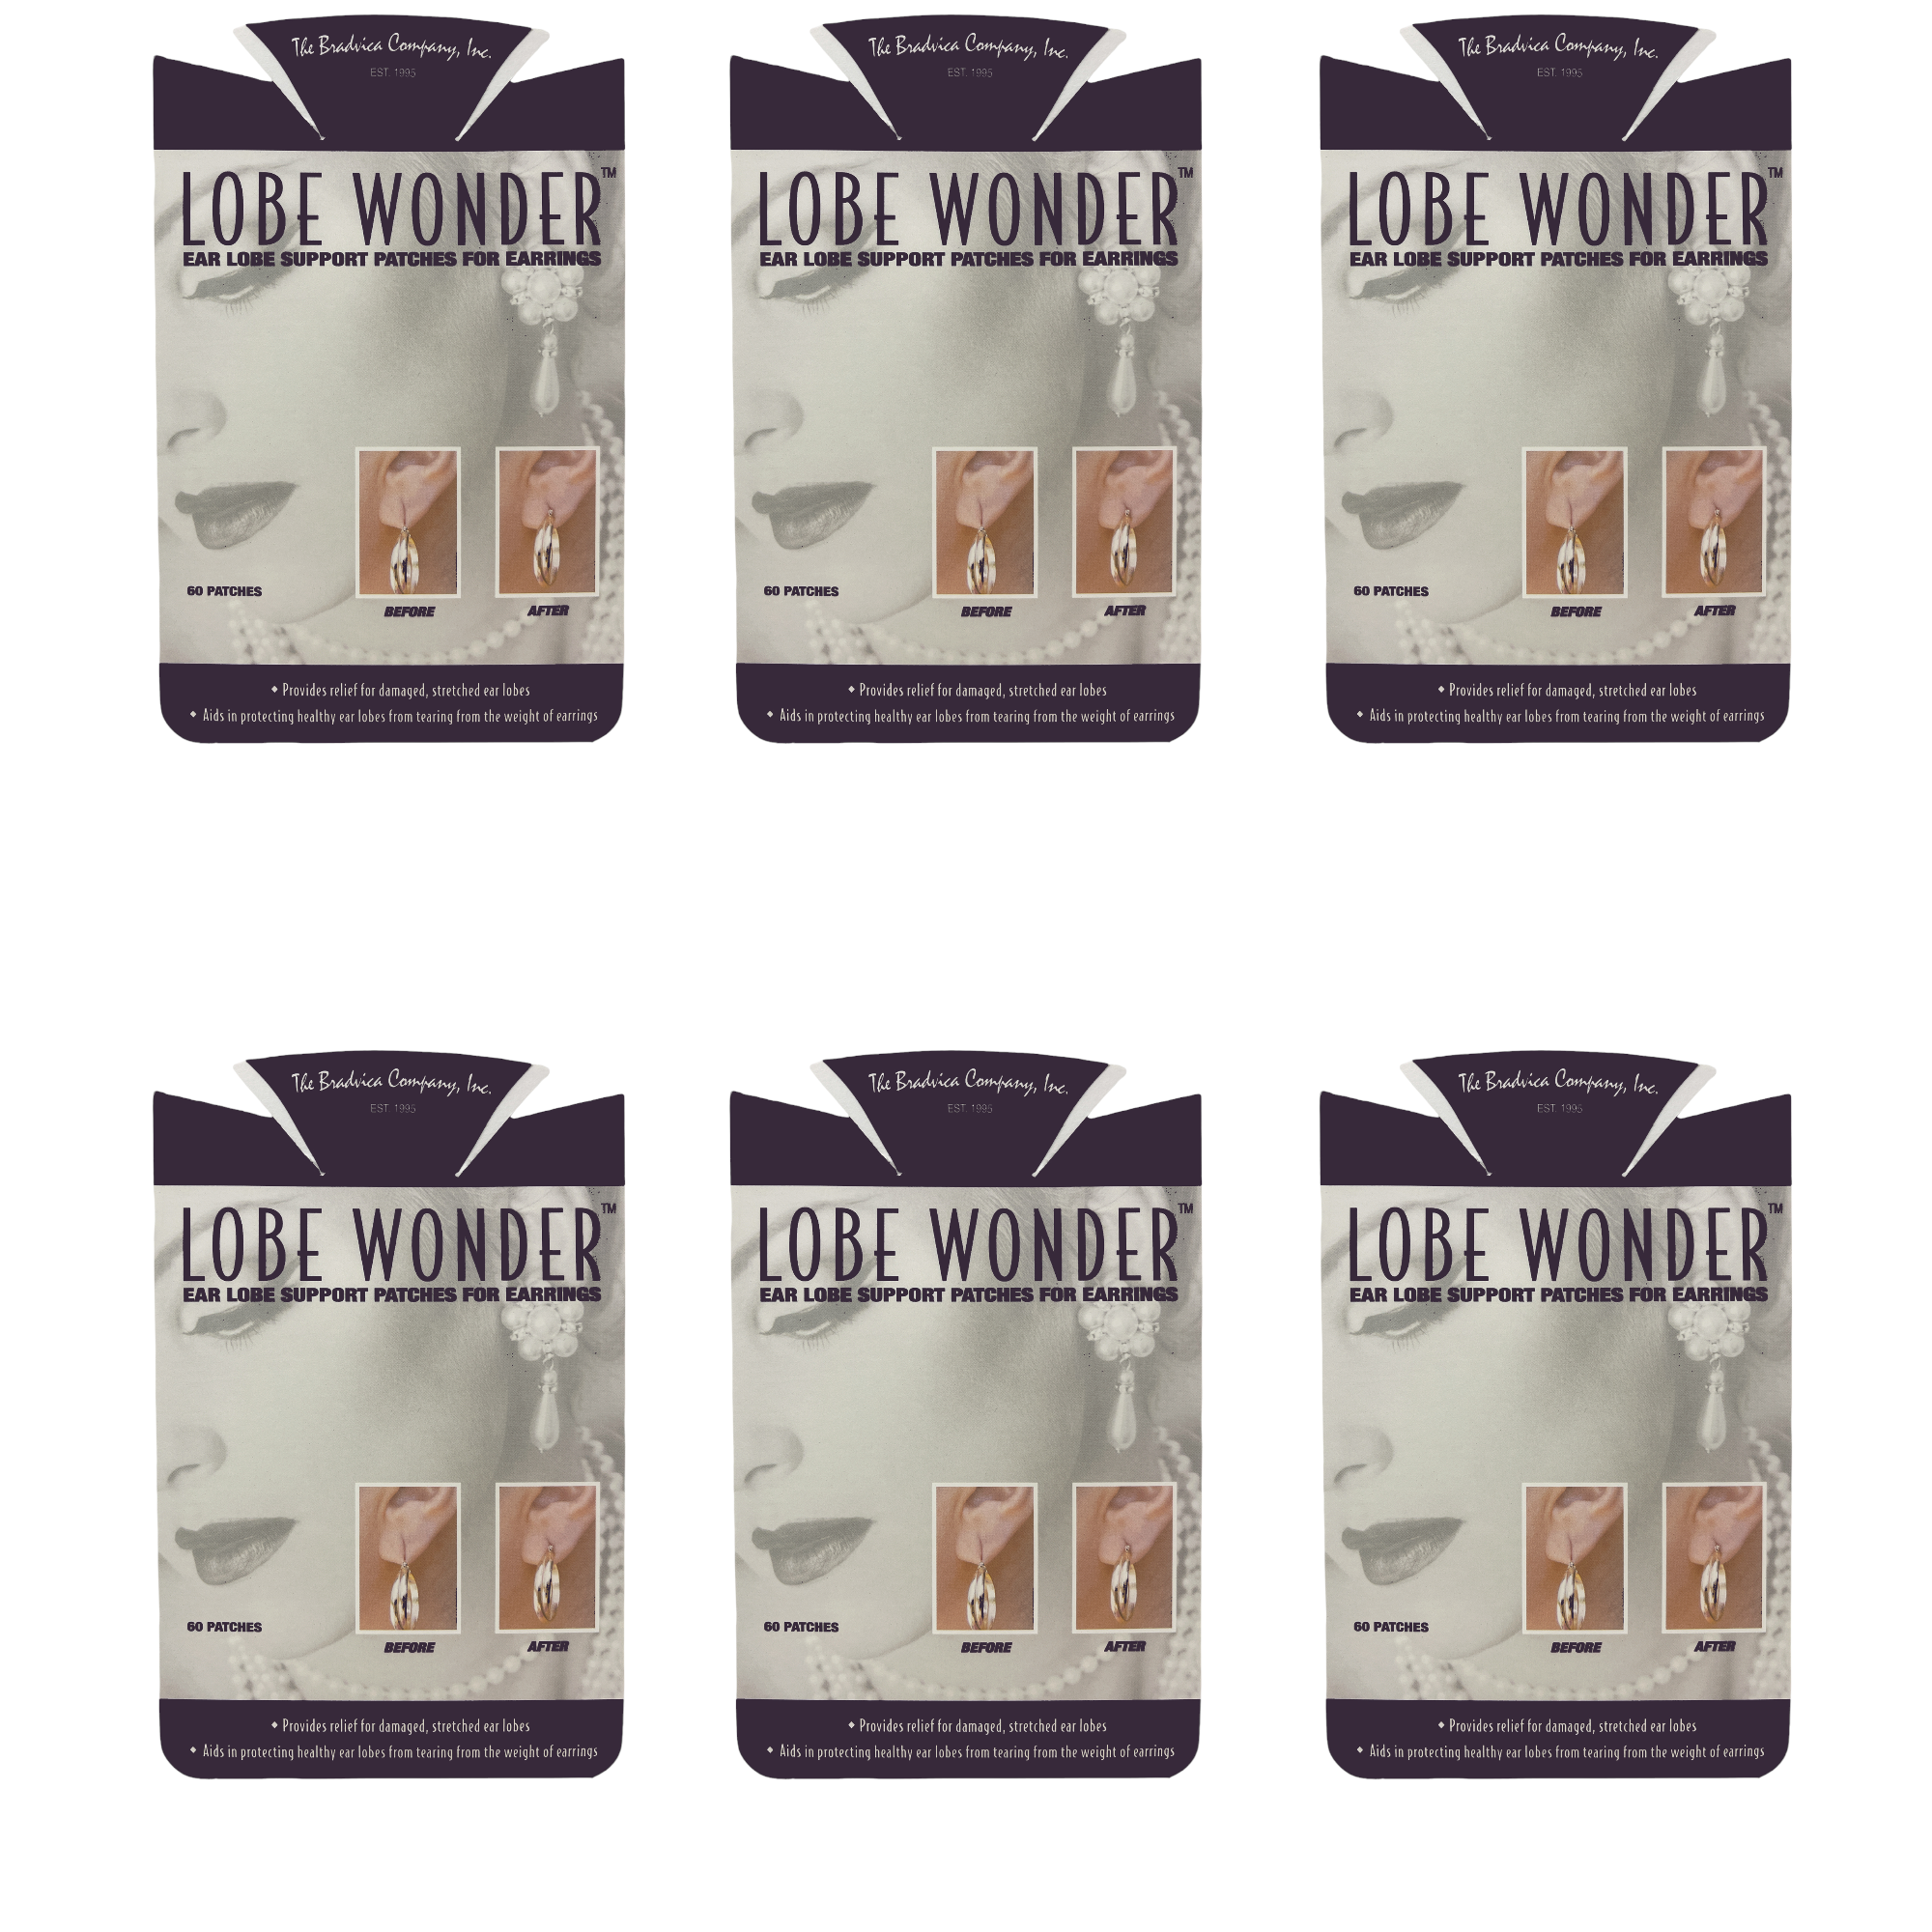 Lobe Wonder 360 Earring Support Patche Self Adhesive - 6 Pack